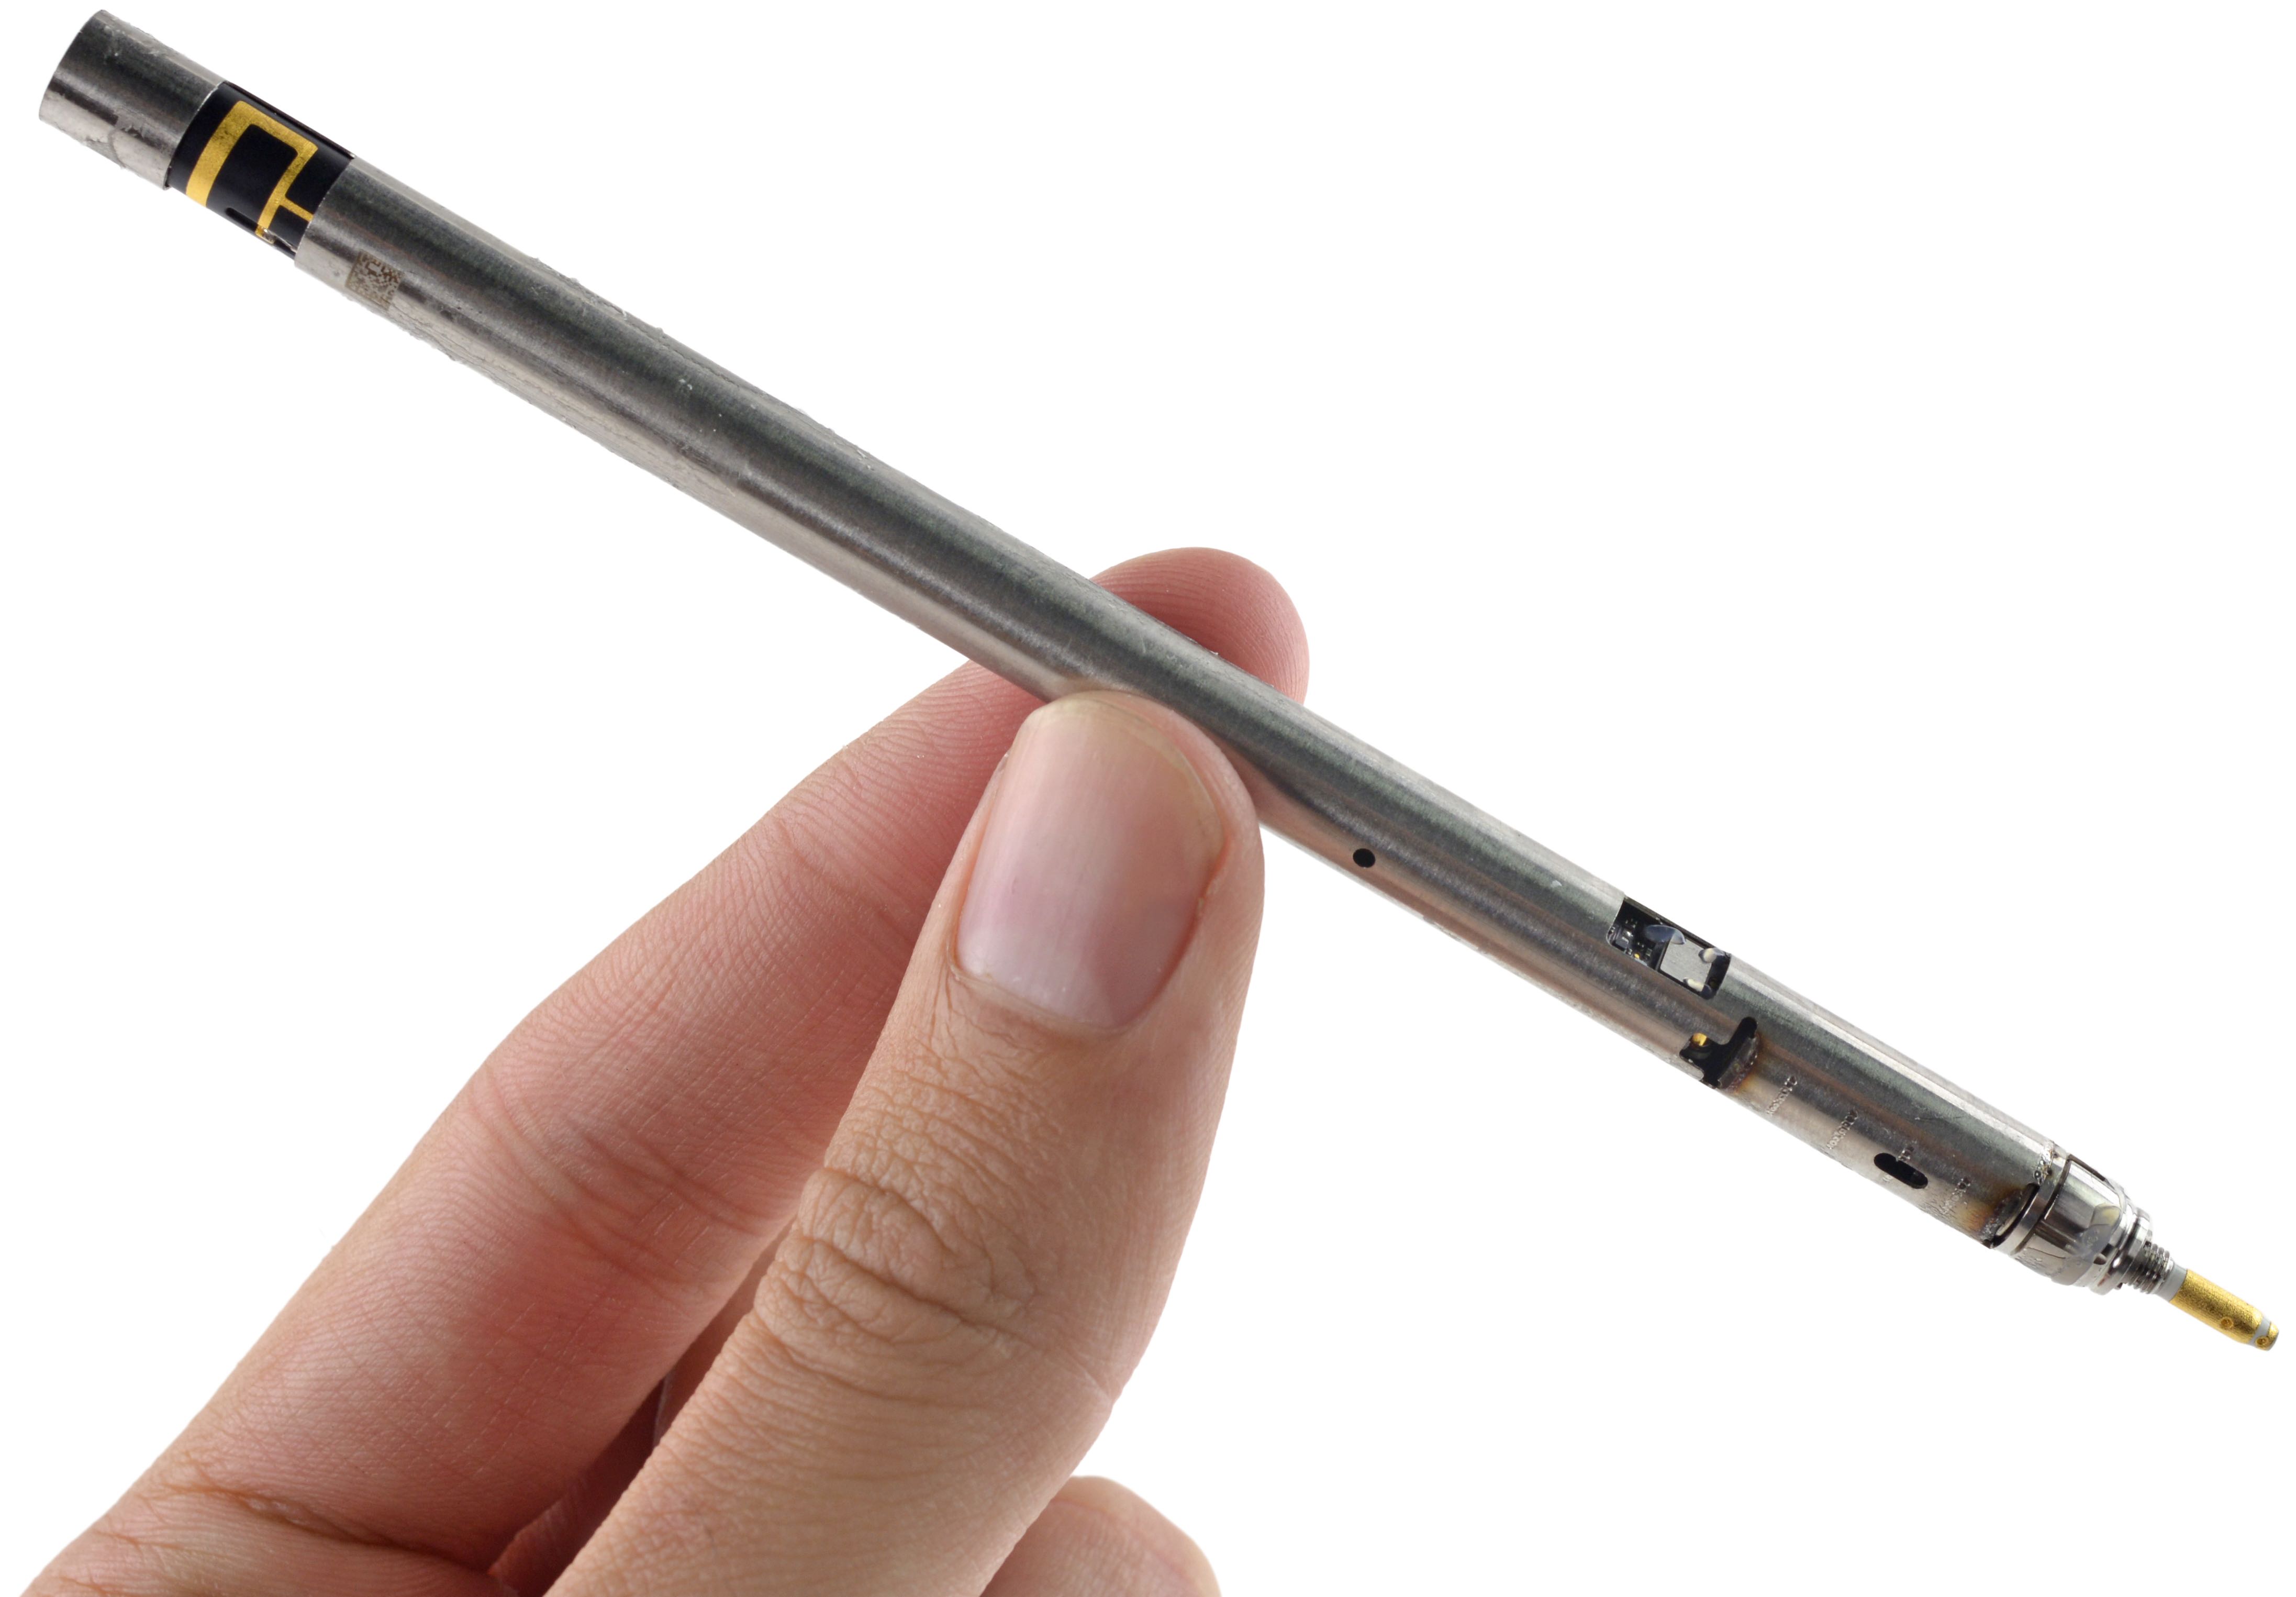 How to check the battery level of Apple Pencil on iPad